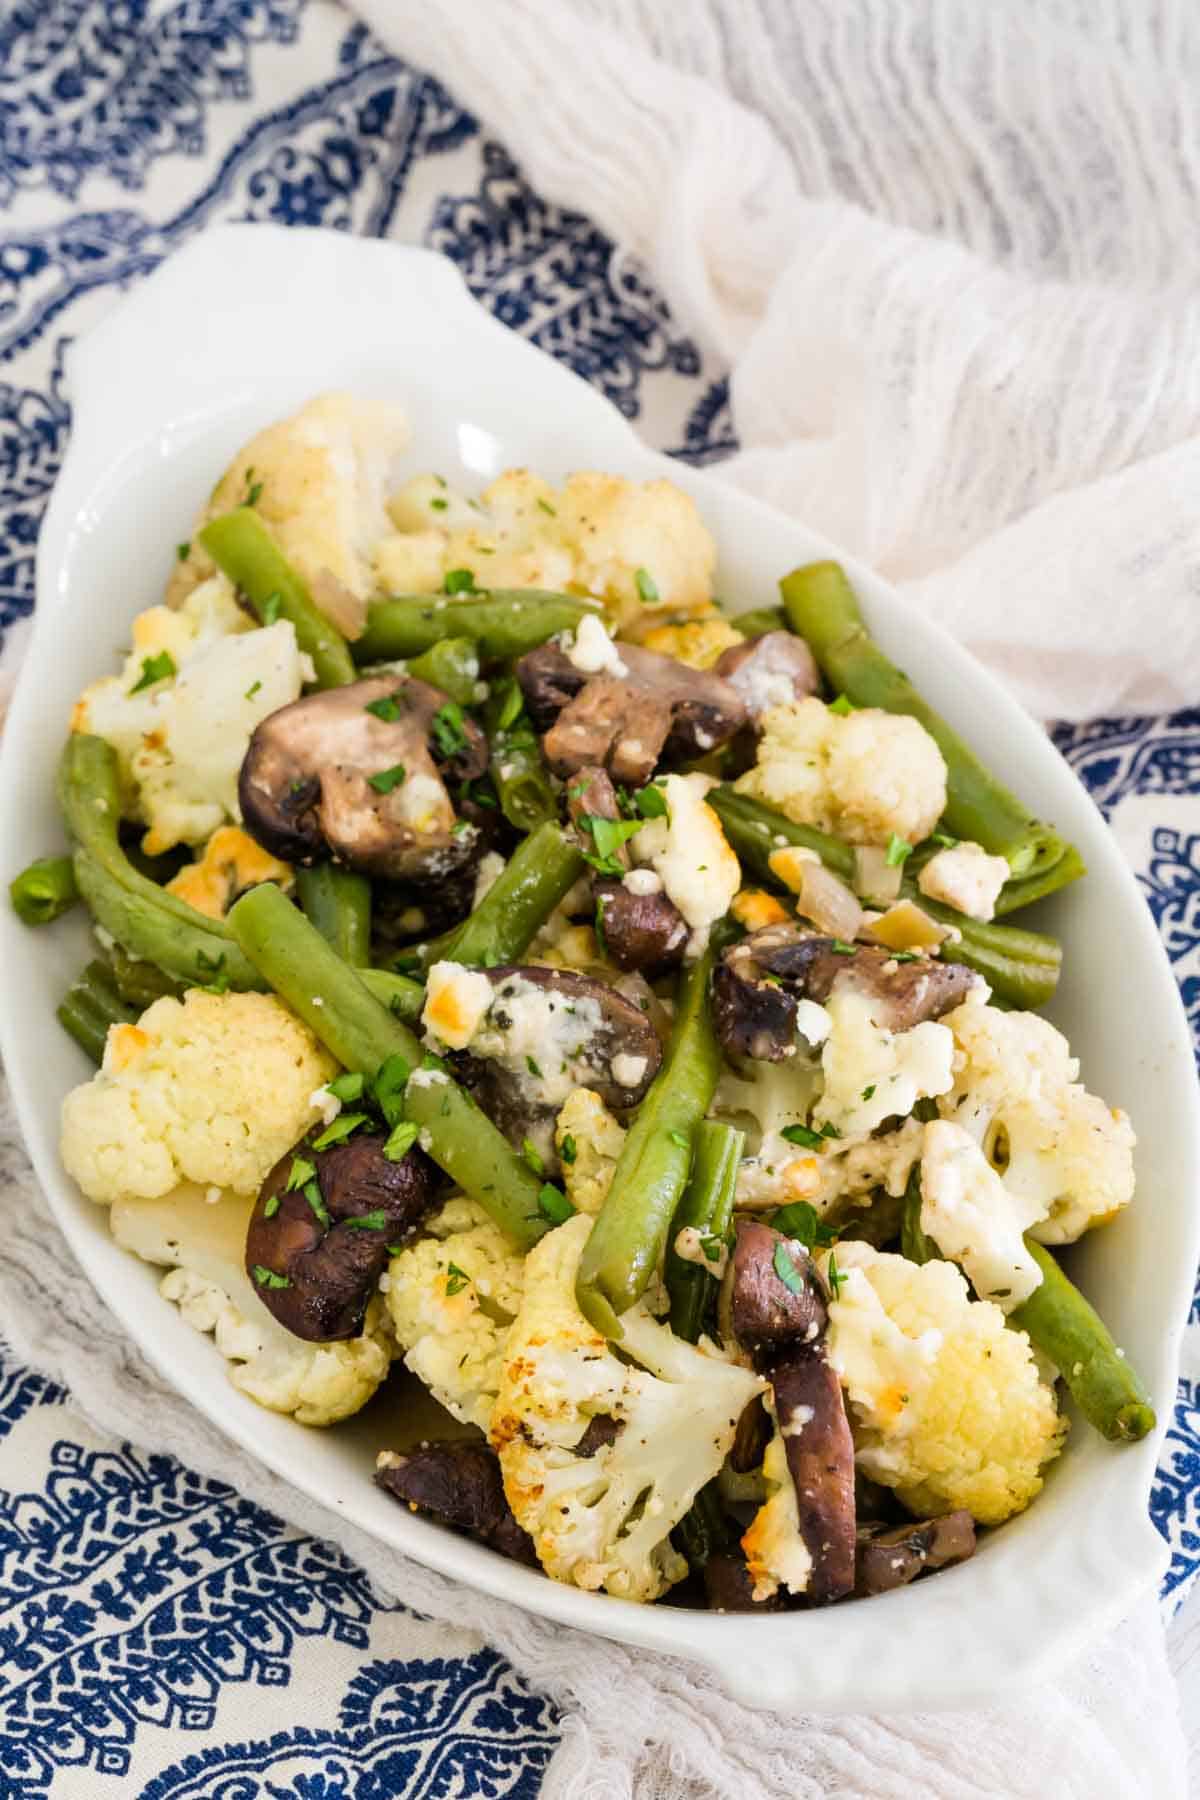 A white serving dish on a blue and white napkin holds a pile of blue cheese roasted vegetables.